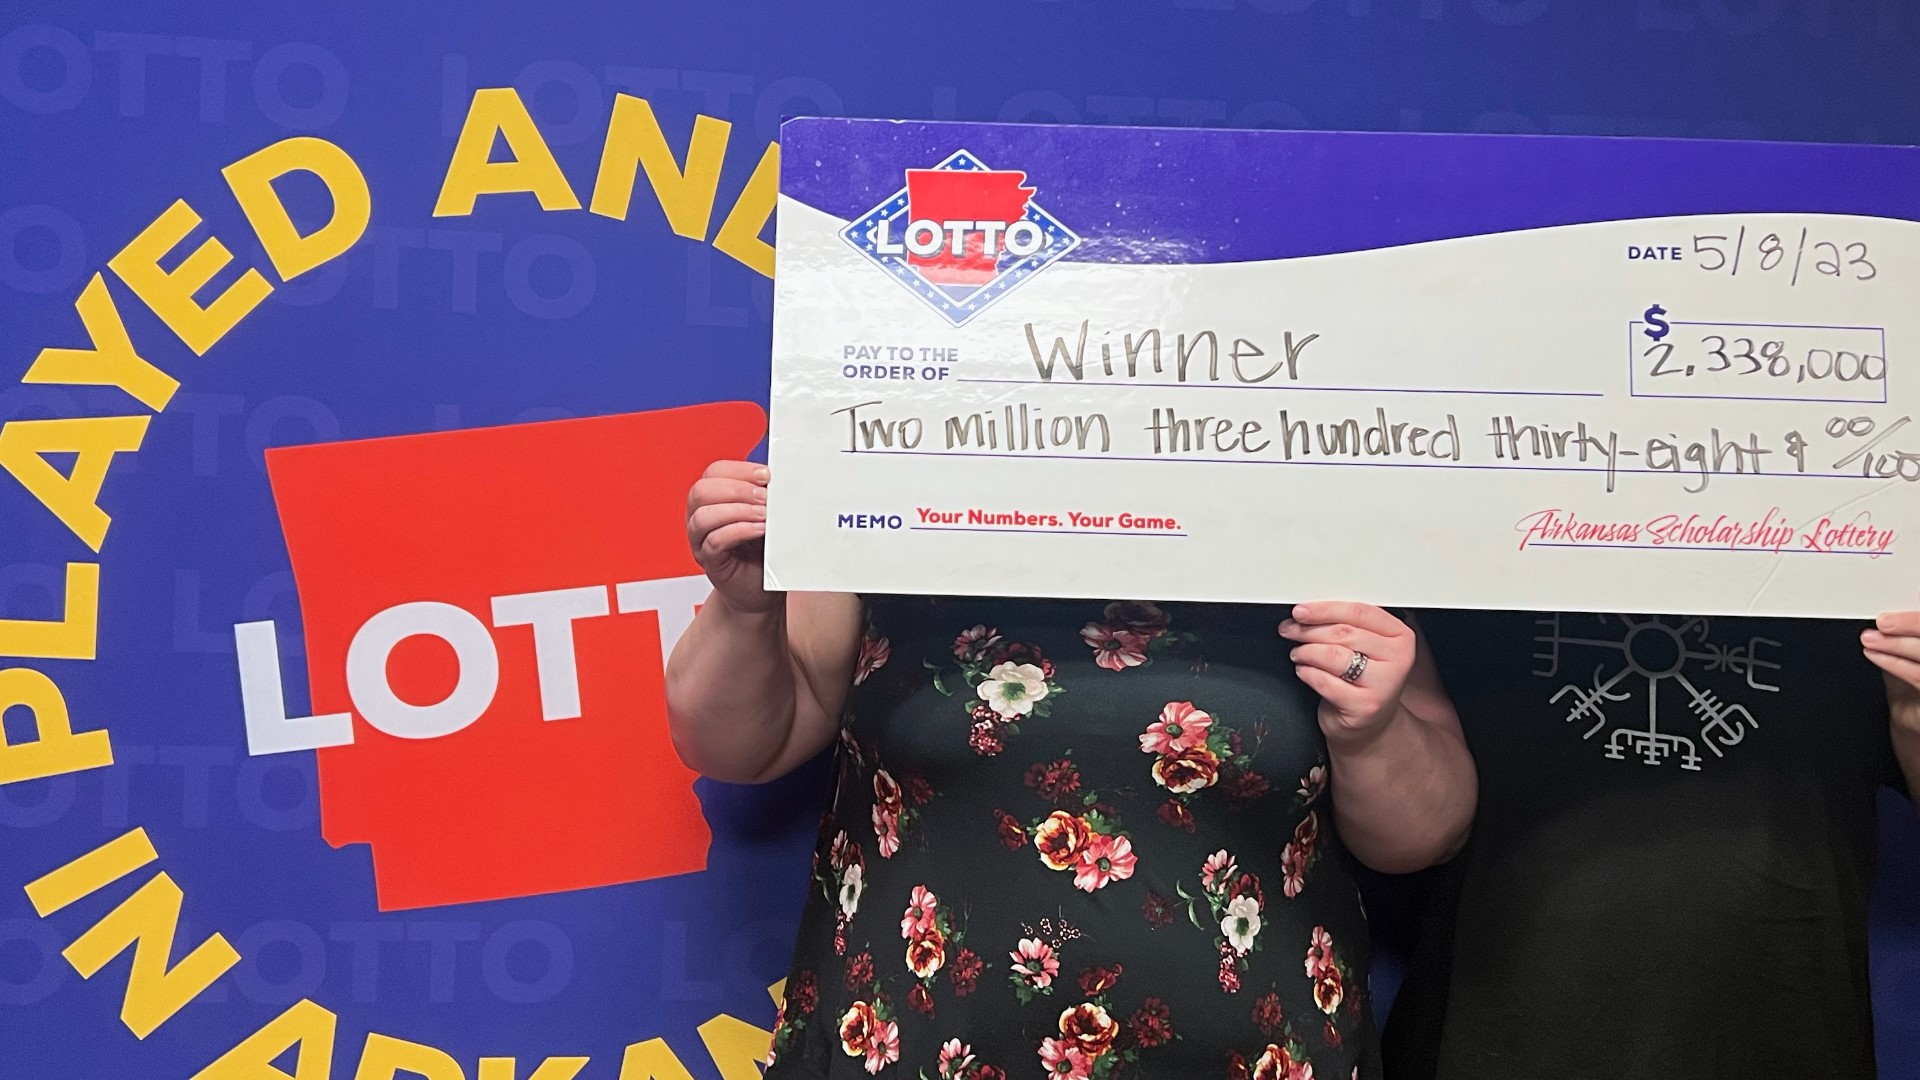 After the $2.3 million were unclaimed for a week, a winner finally came forward.